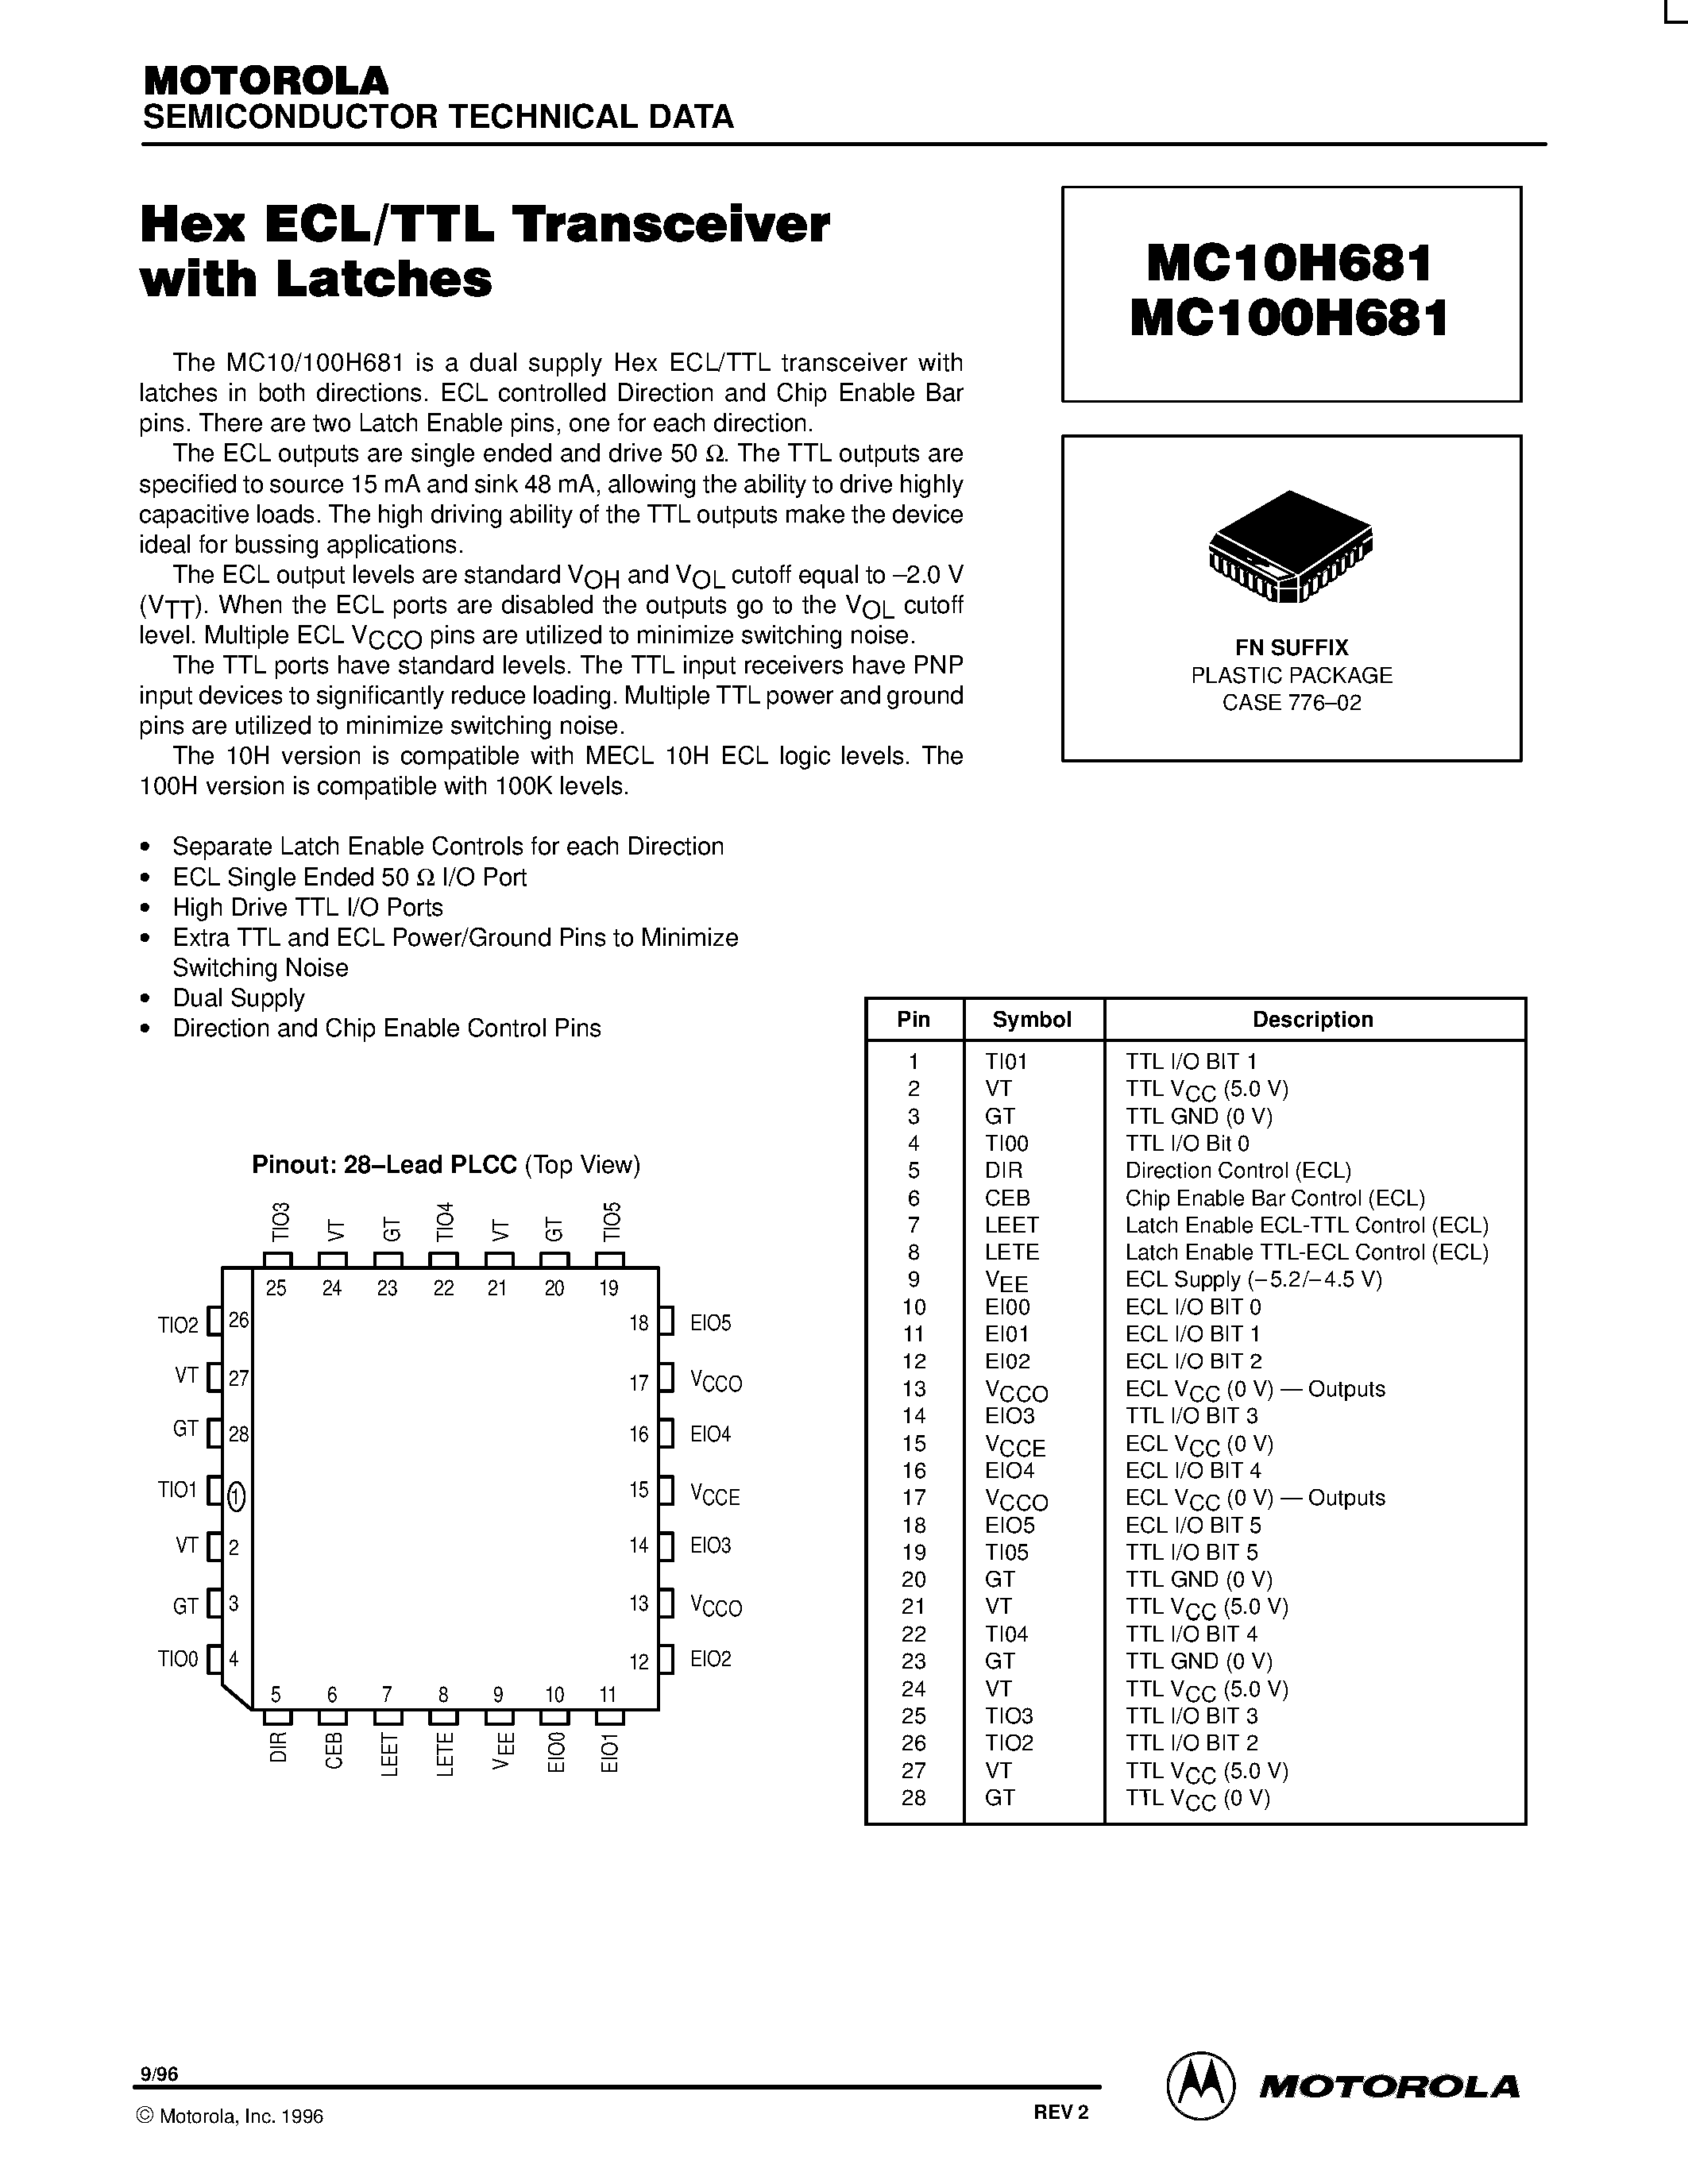 Datasheet MC10H681 - Hex ECL/TTL Transceiver with Latches page 1